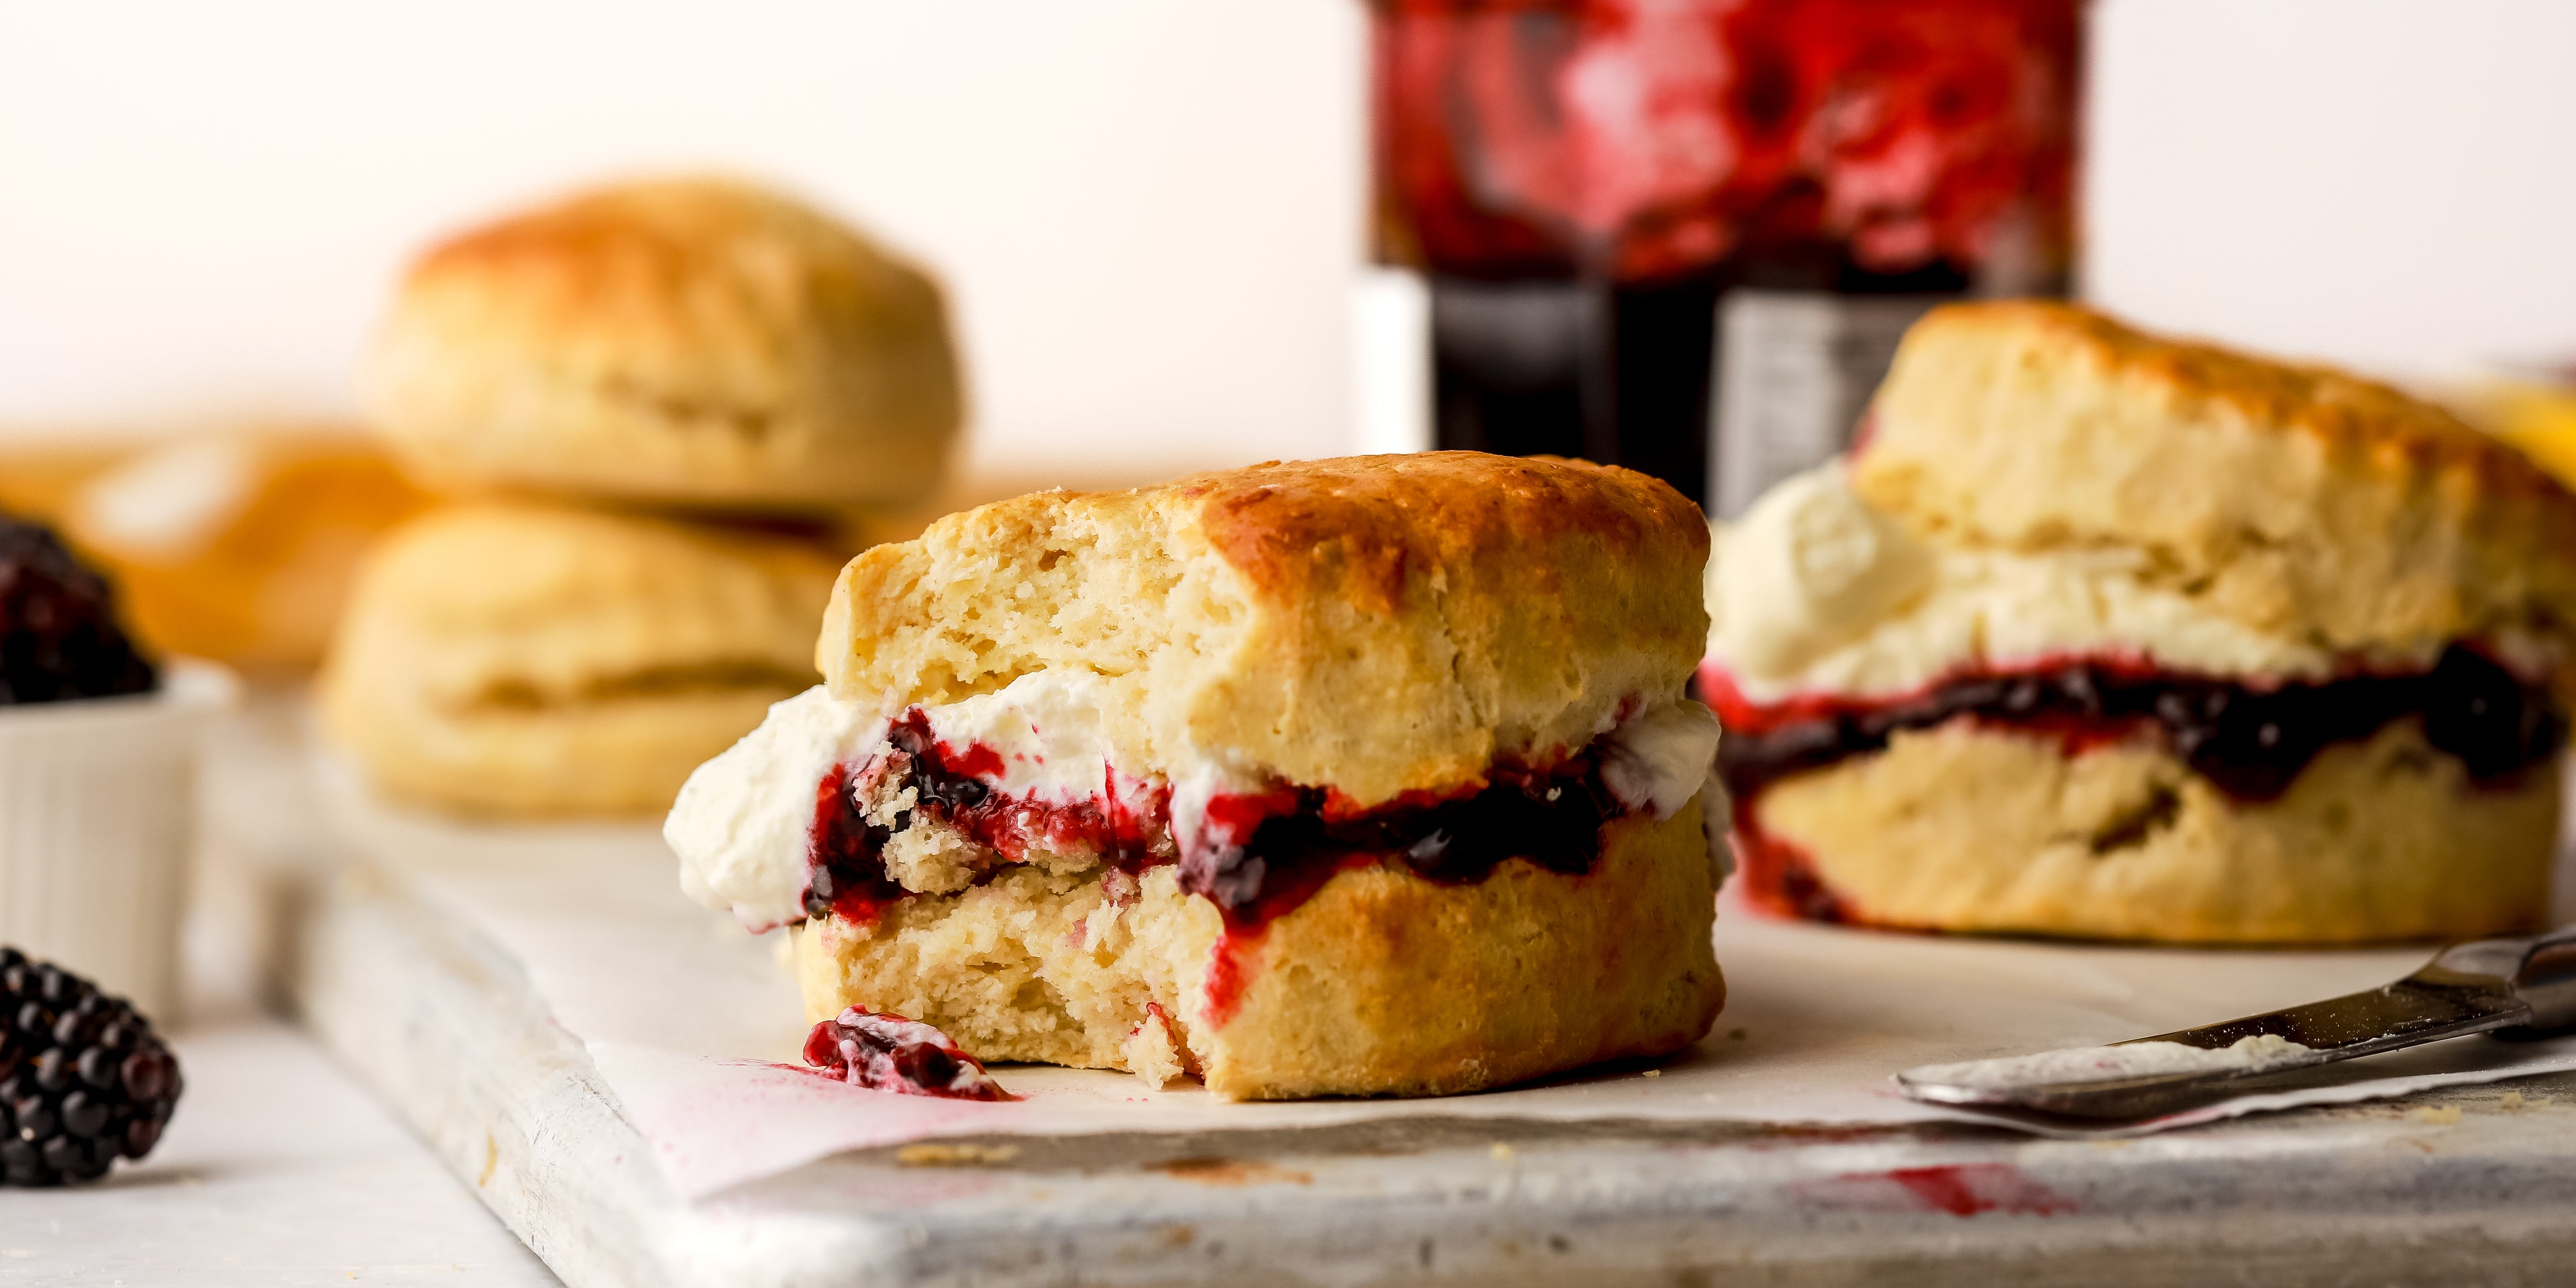 Scone with cream and jam in centre and a bite taken out of it